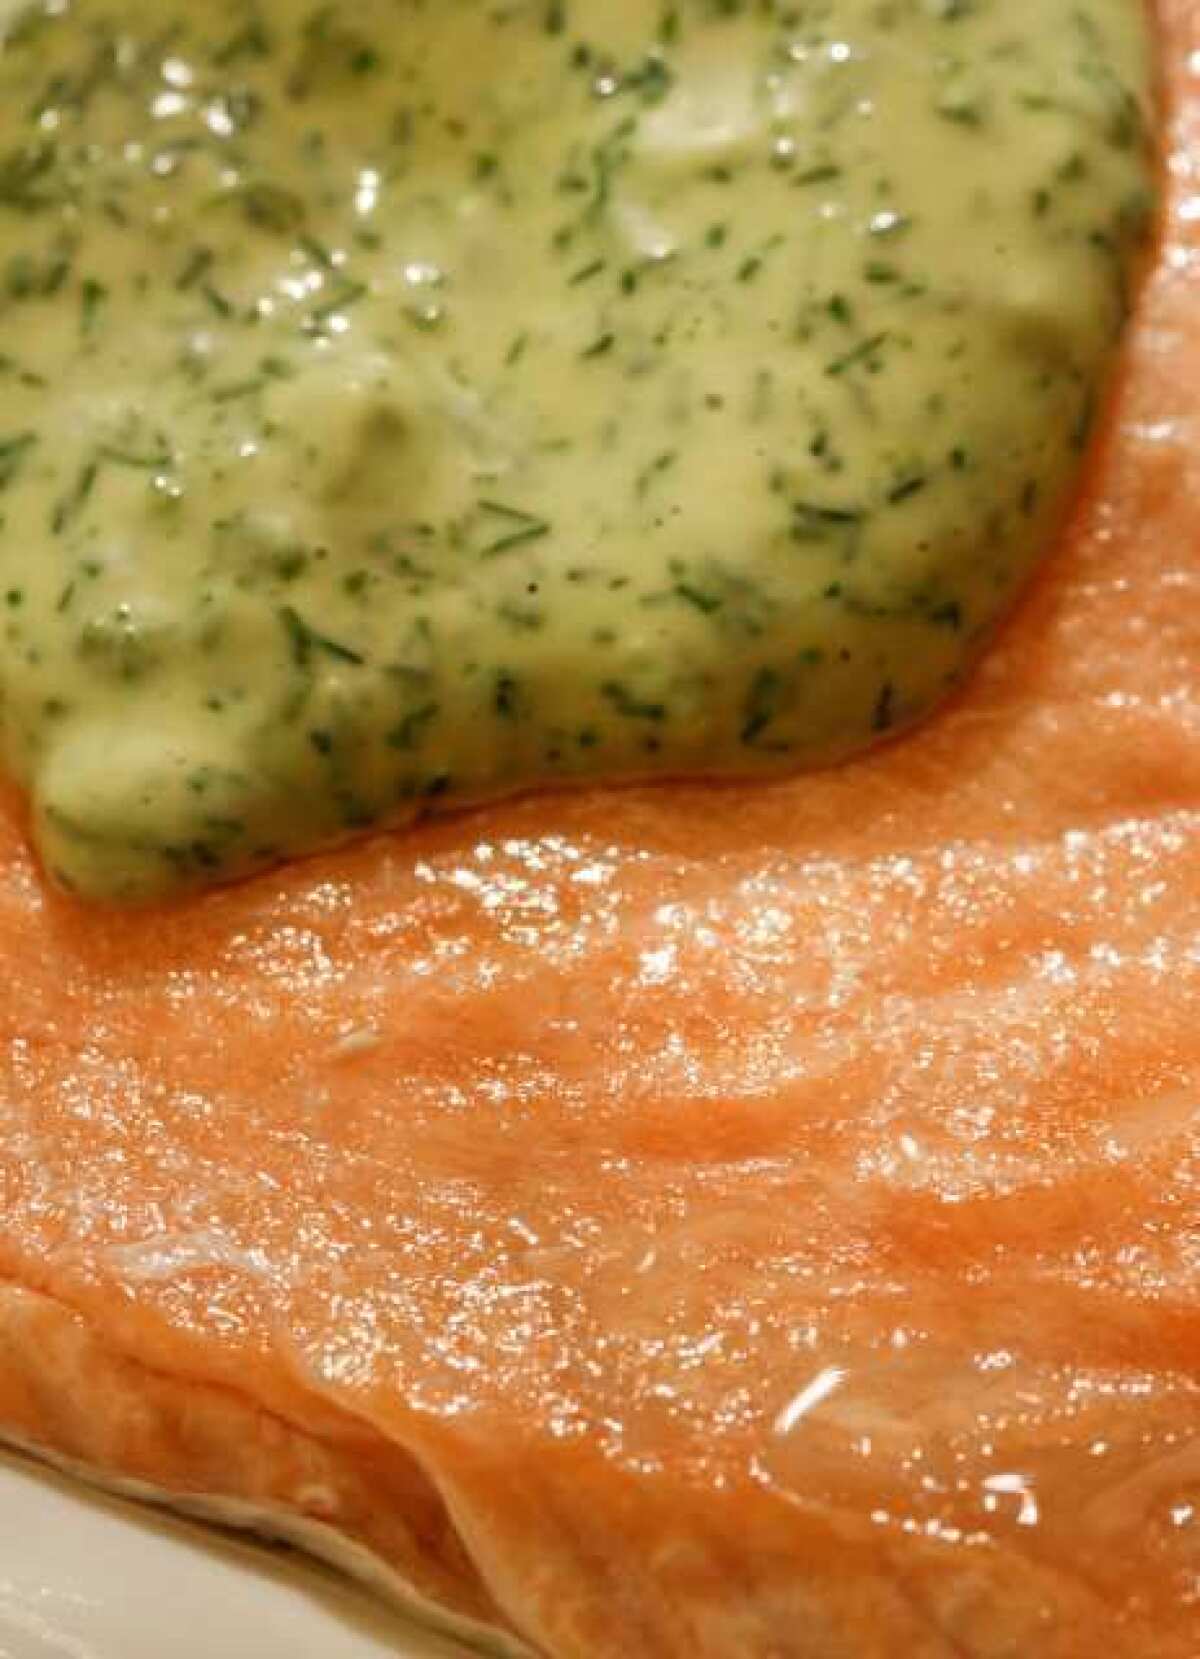 Thanks to a fantastic season, diners will be able to really enjoy salmon, including with dill mayonnaise.